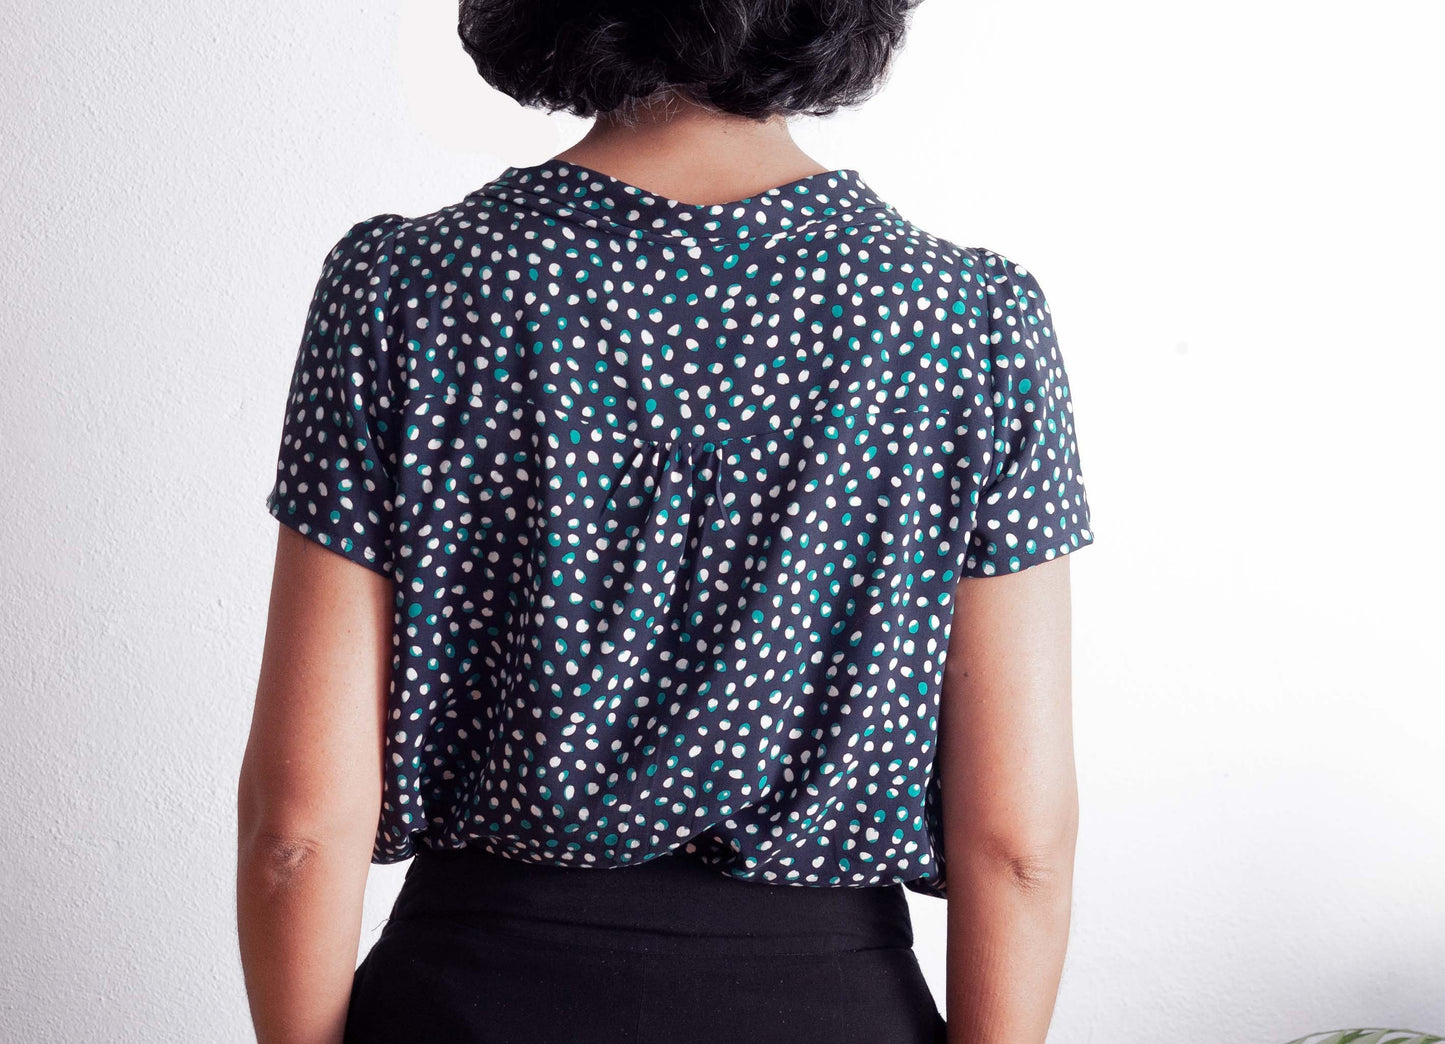 LIL blouse - sewing pattern